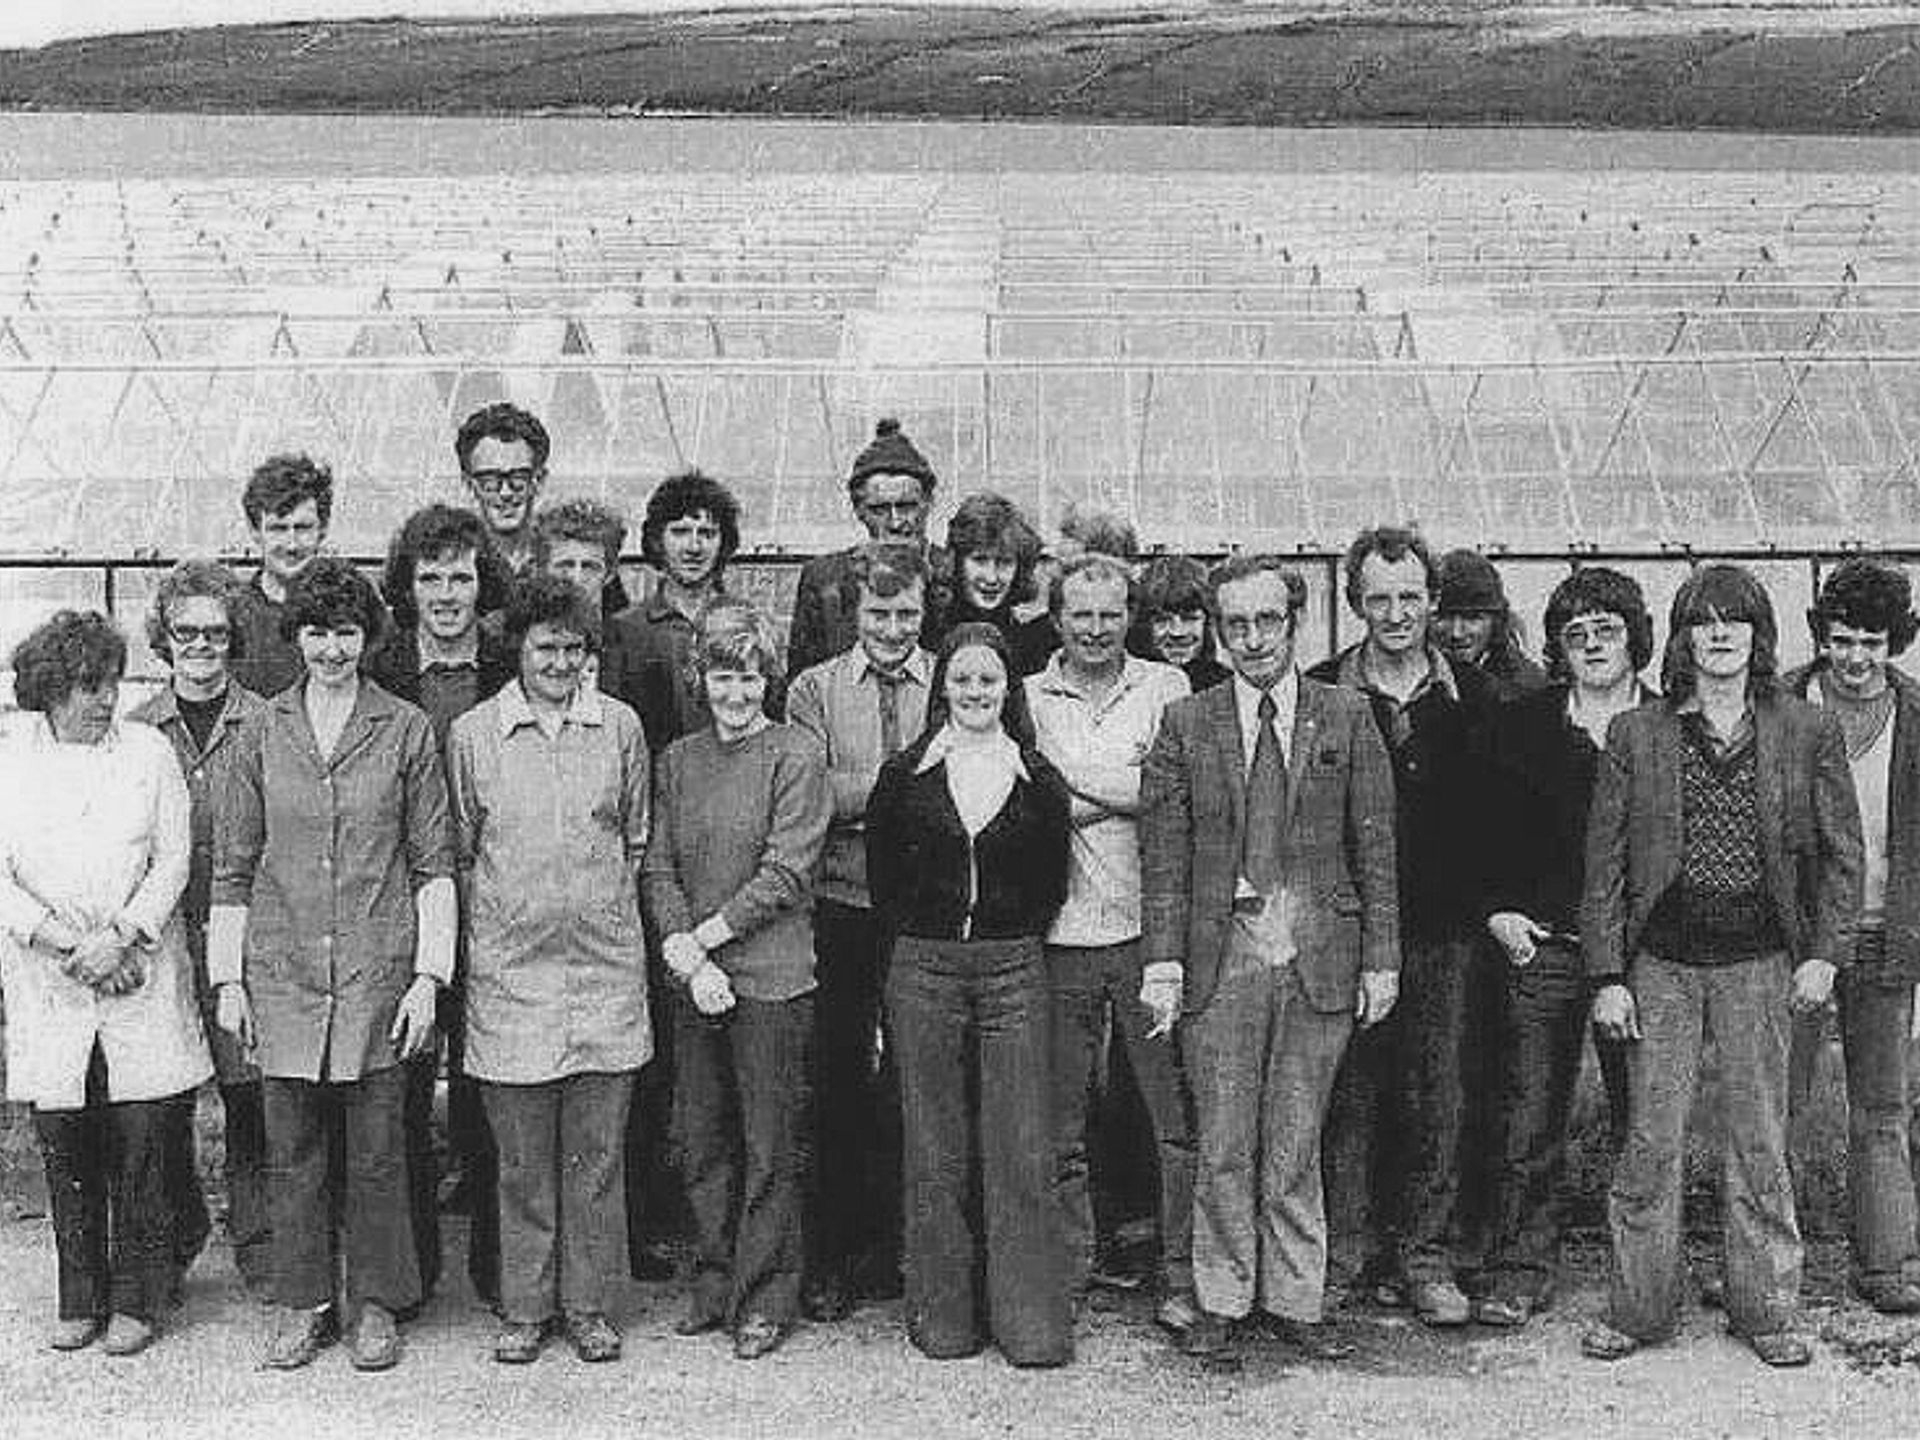 In the late 1960s thirty-six full-time staff with an additional twenty-six seasonal workers grew tomatoes, potatoes, carrots, and lettuce under 8 acres of oil-heated glasshouses supplying the Dublin markets.